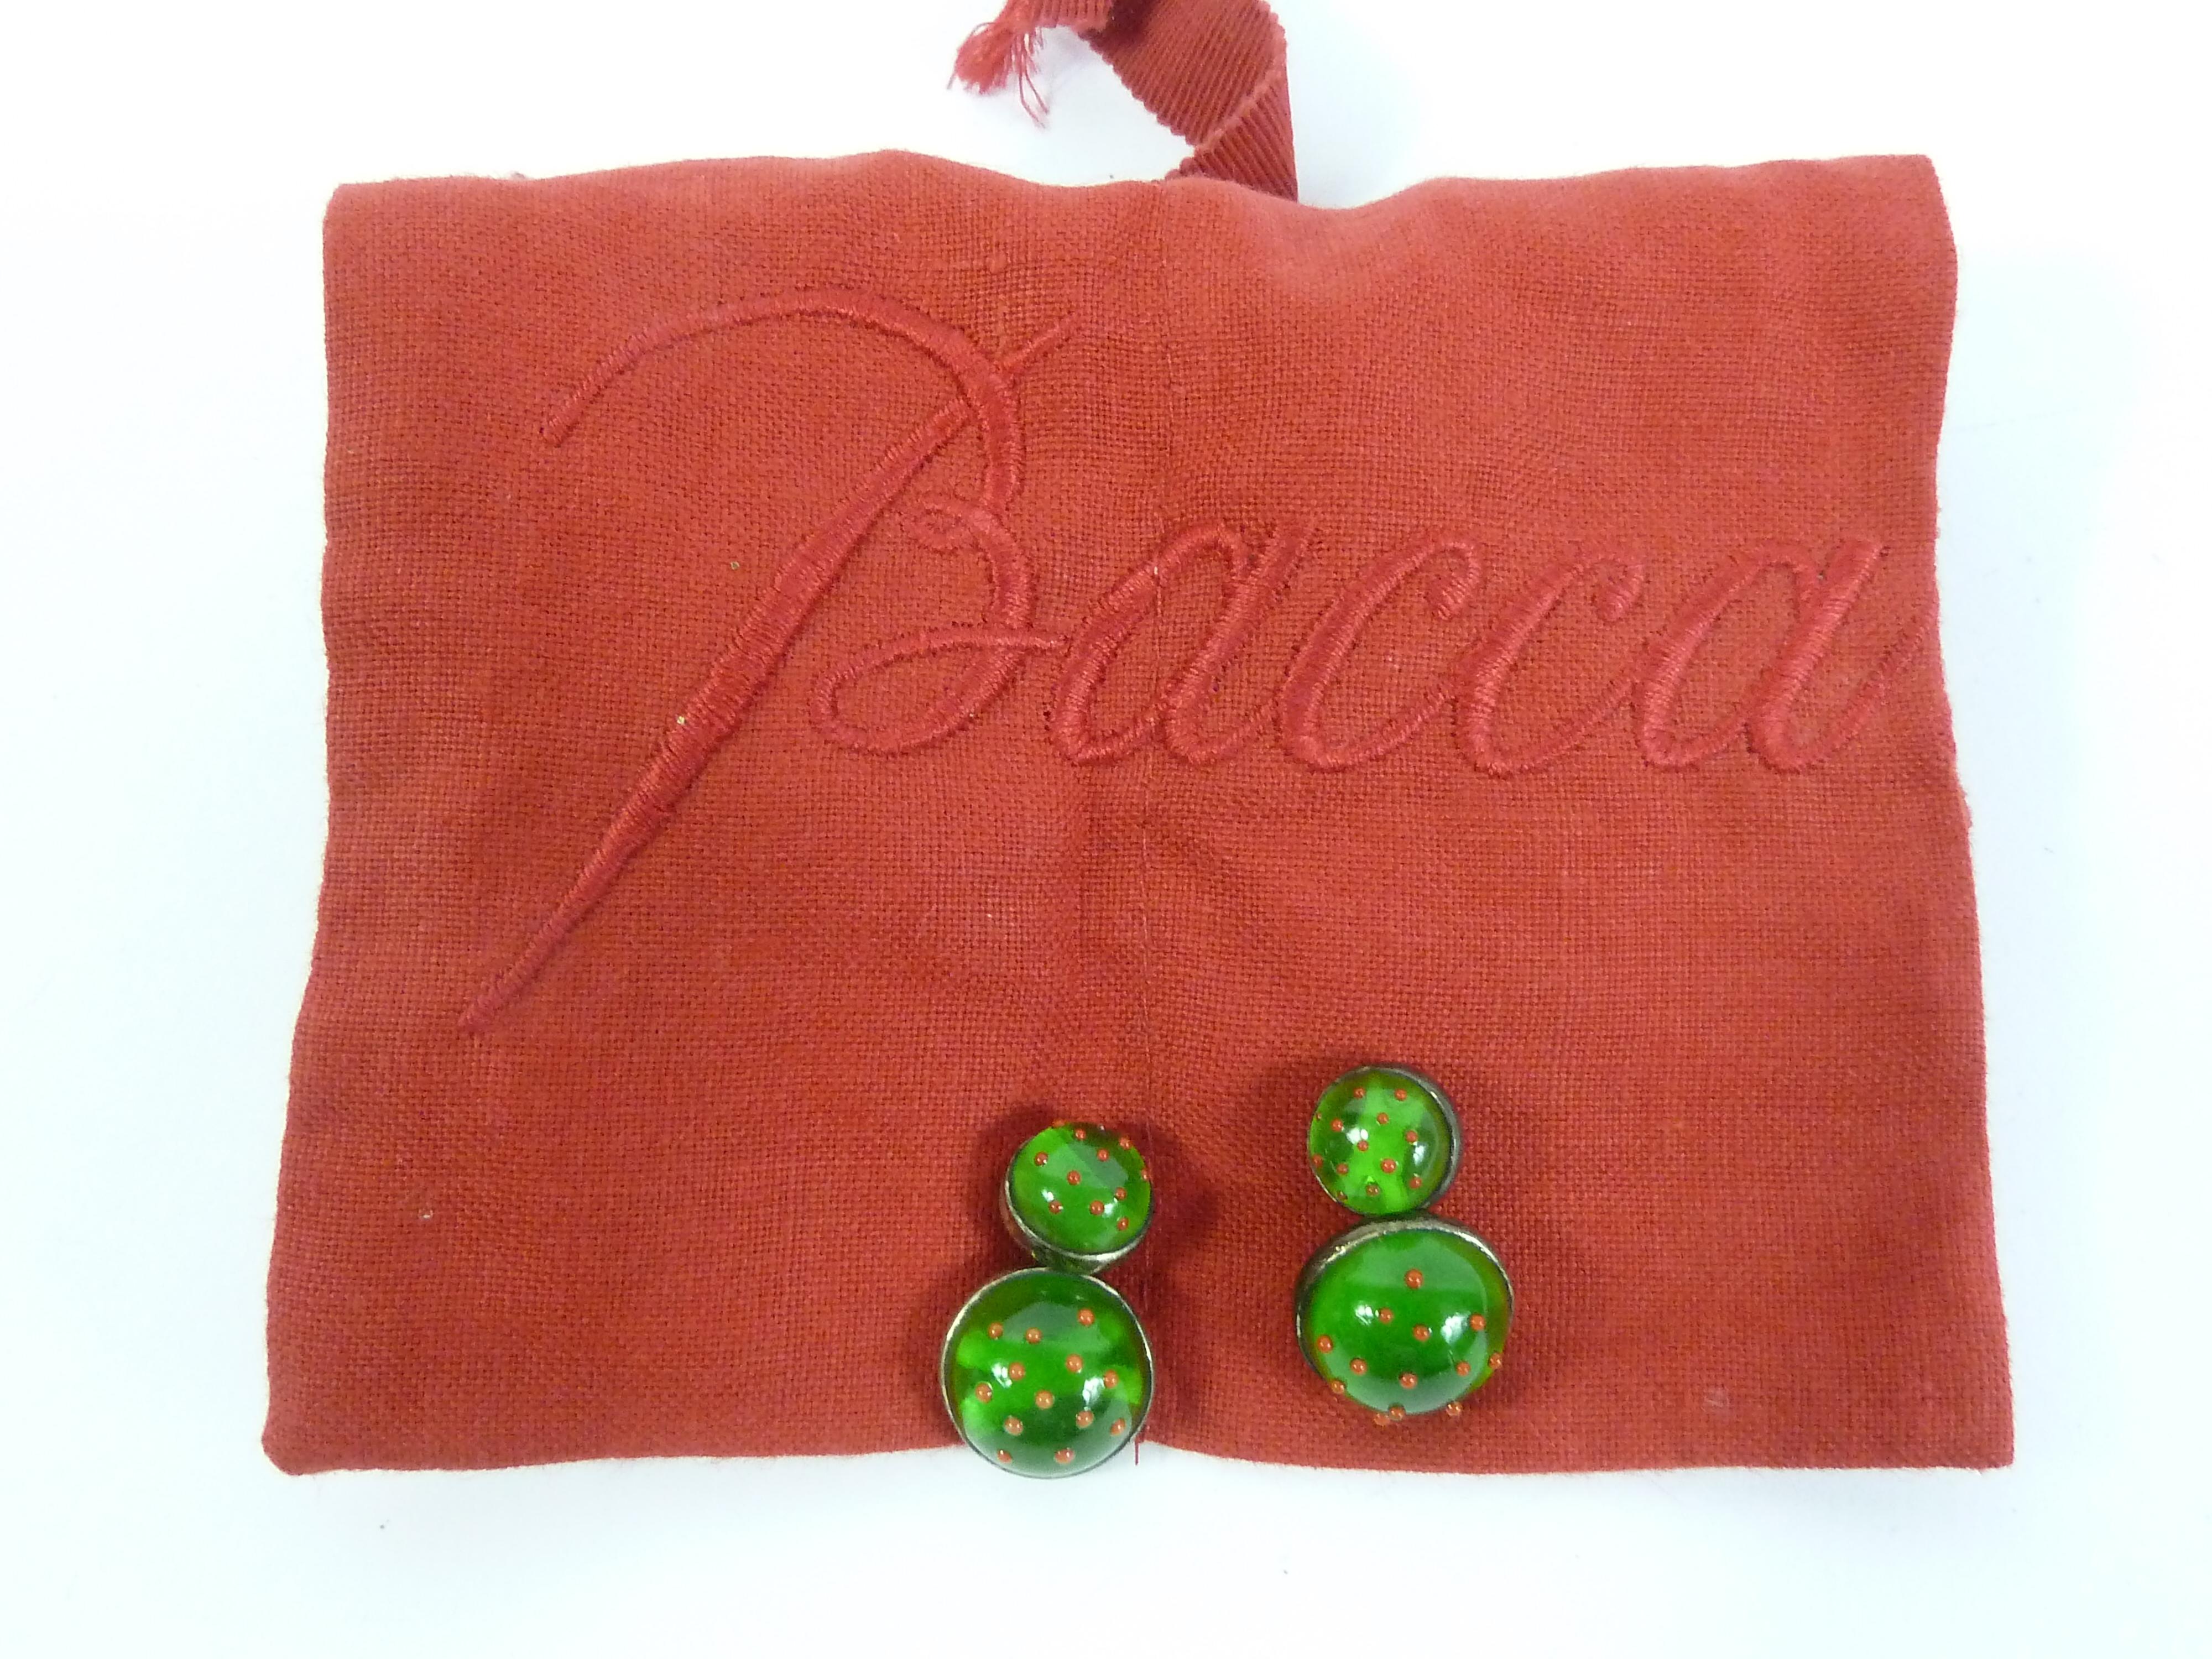 Baccarat vintage 90s cufflinks. Men's crystal cufflinks with silver colored base. Green color with red decoration, which depicts a ladybug. Made in Italy. Excellent vintage condition. Original fabric case.

Large diameter: 1.5cm
Small diameter: 1 cm